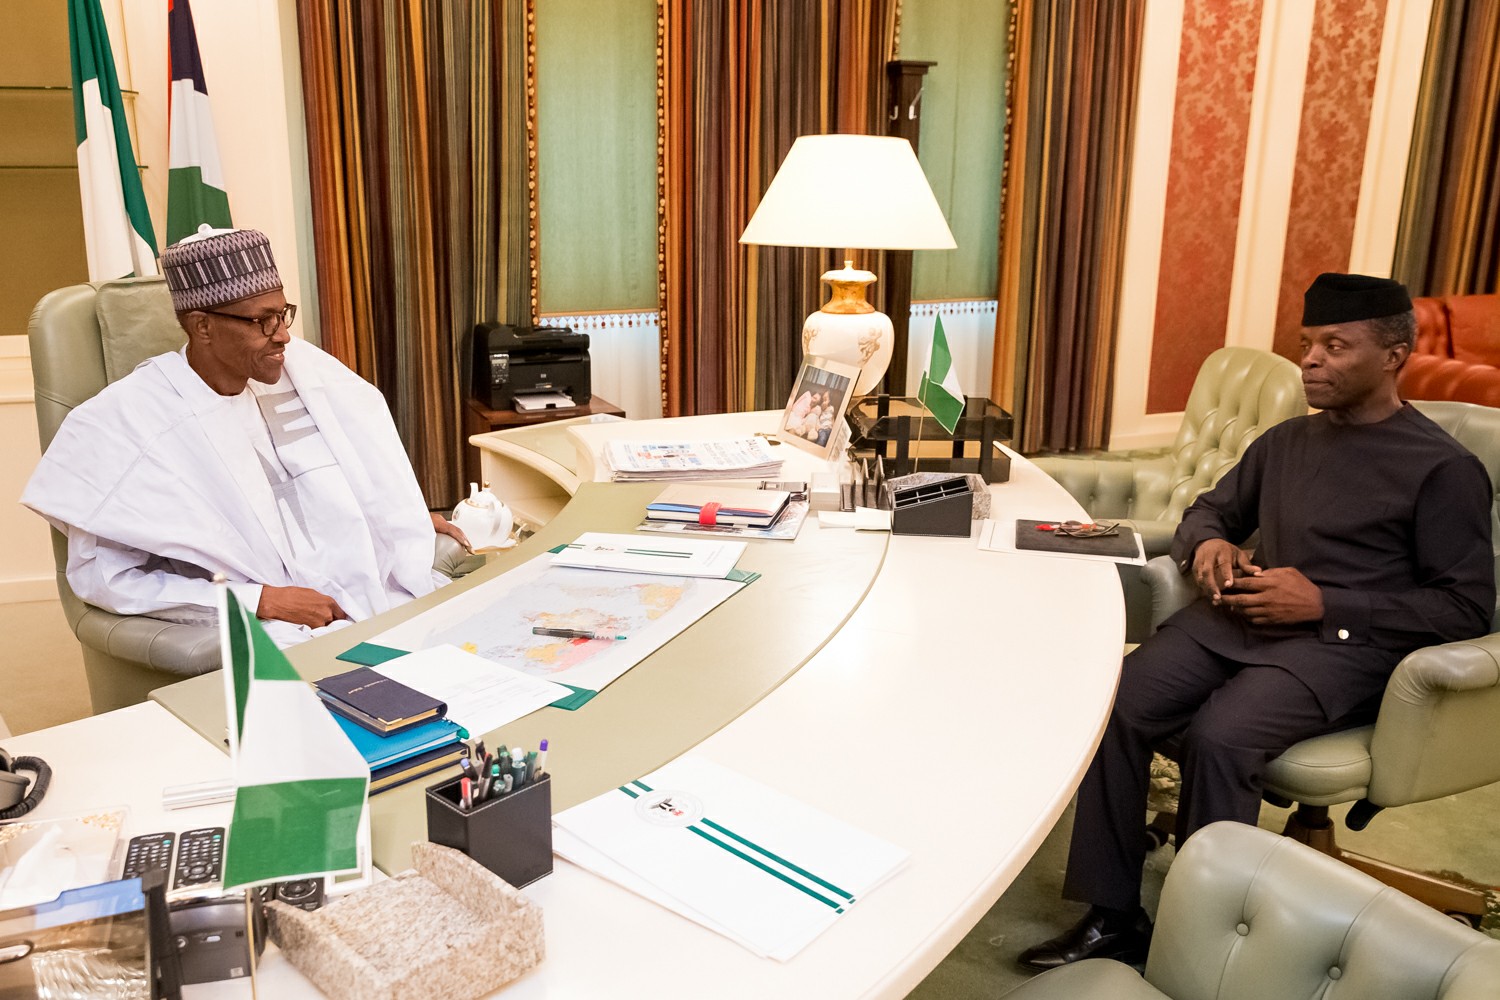 Q&A With VP Osinbajo After Handing Over Power To President Buhari